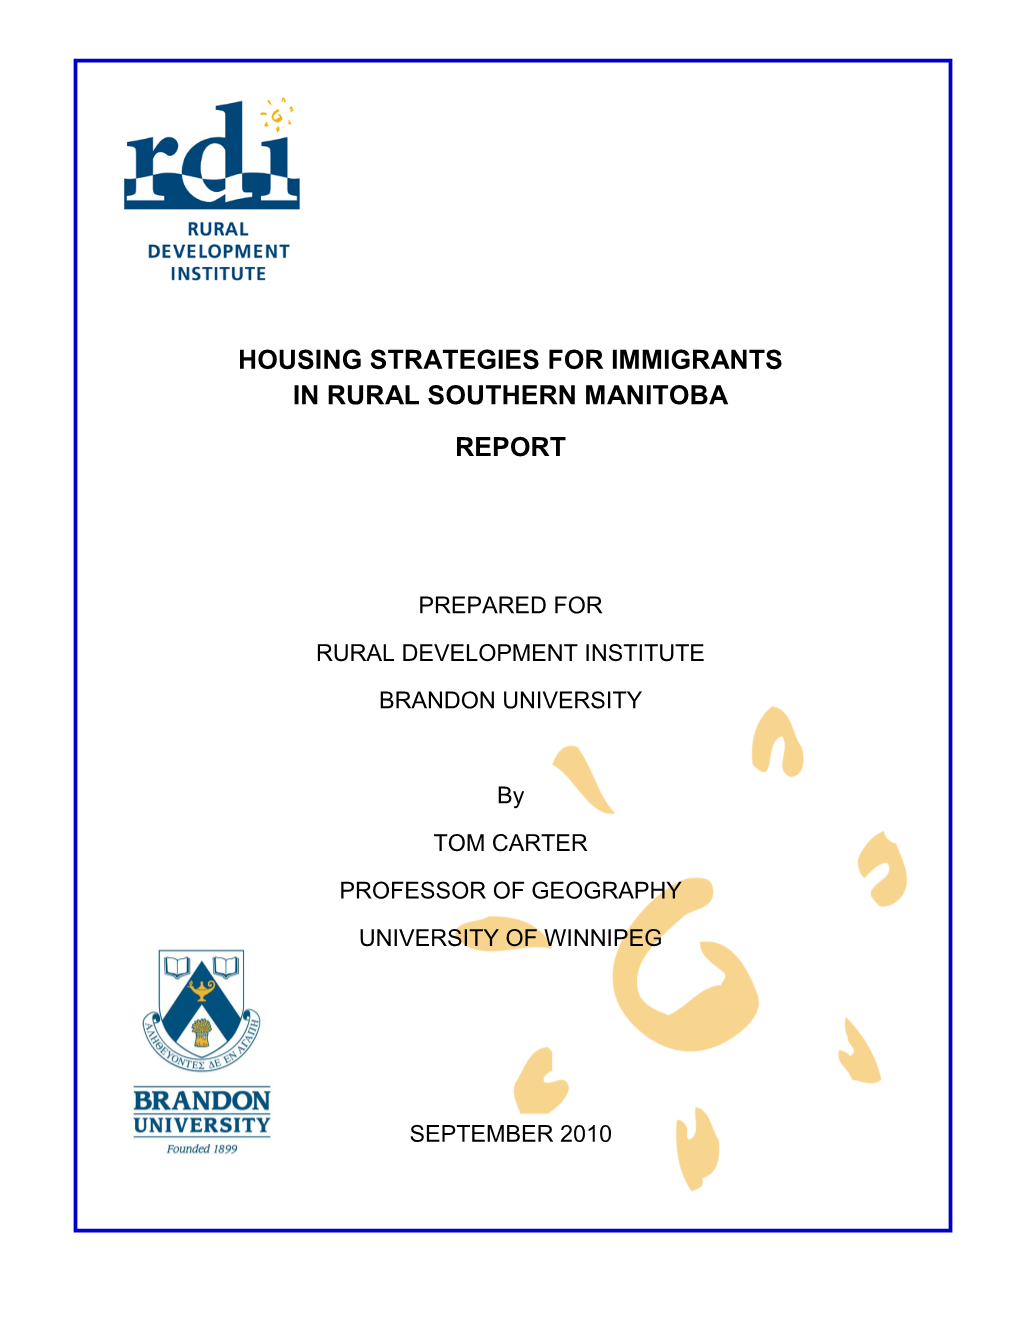 Housing Strategies for Immigrants in Rural Southern Manitoba Report